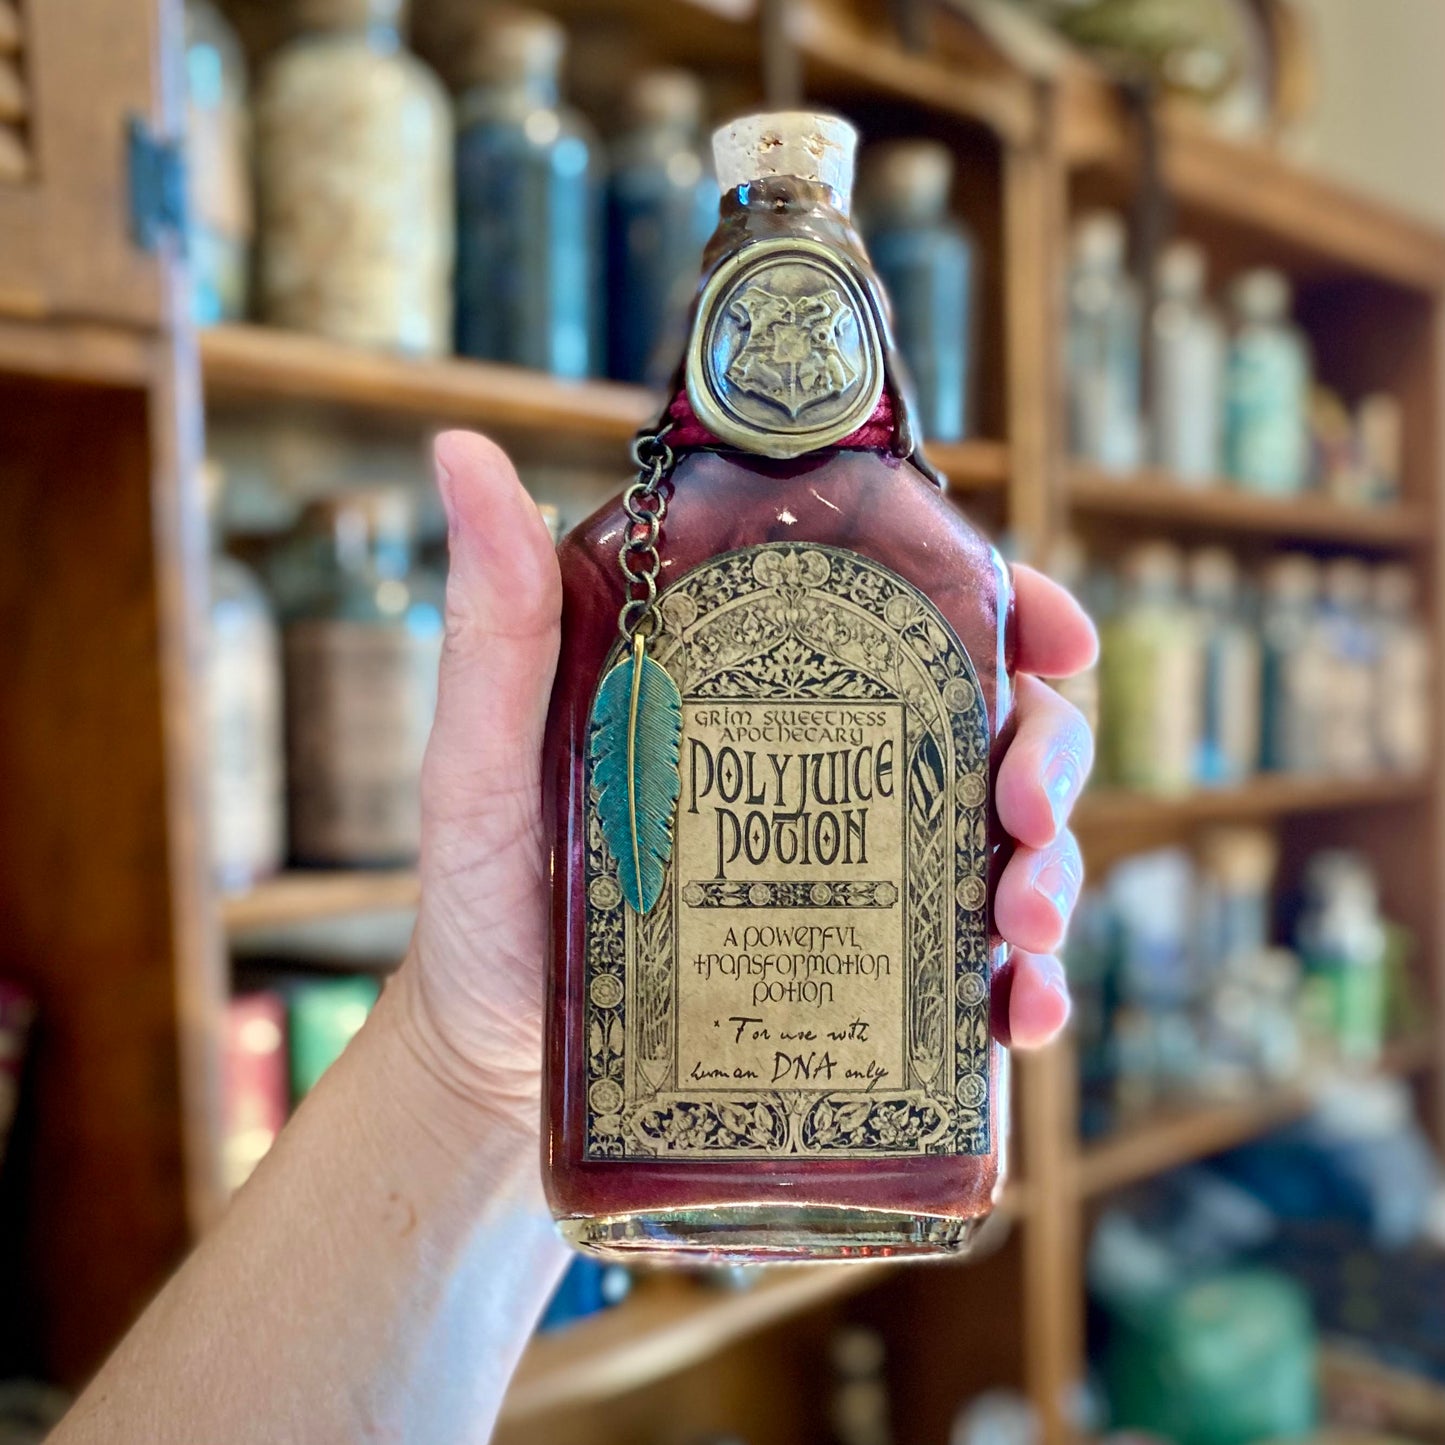 PolyJuice Potion, Color Changing Potion Bottle